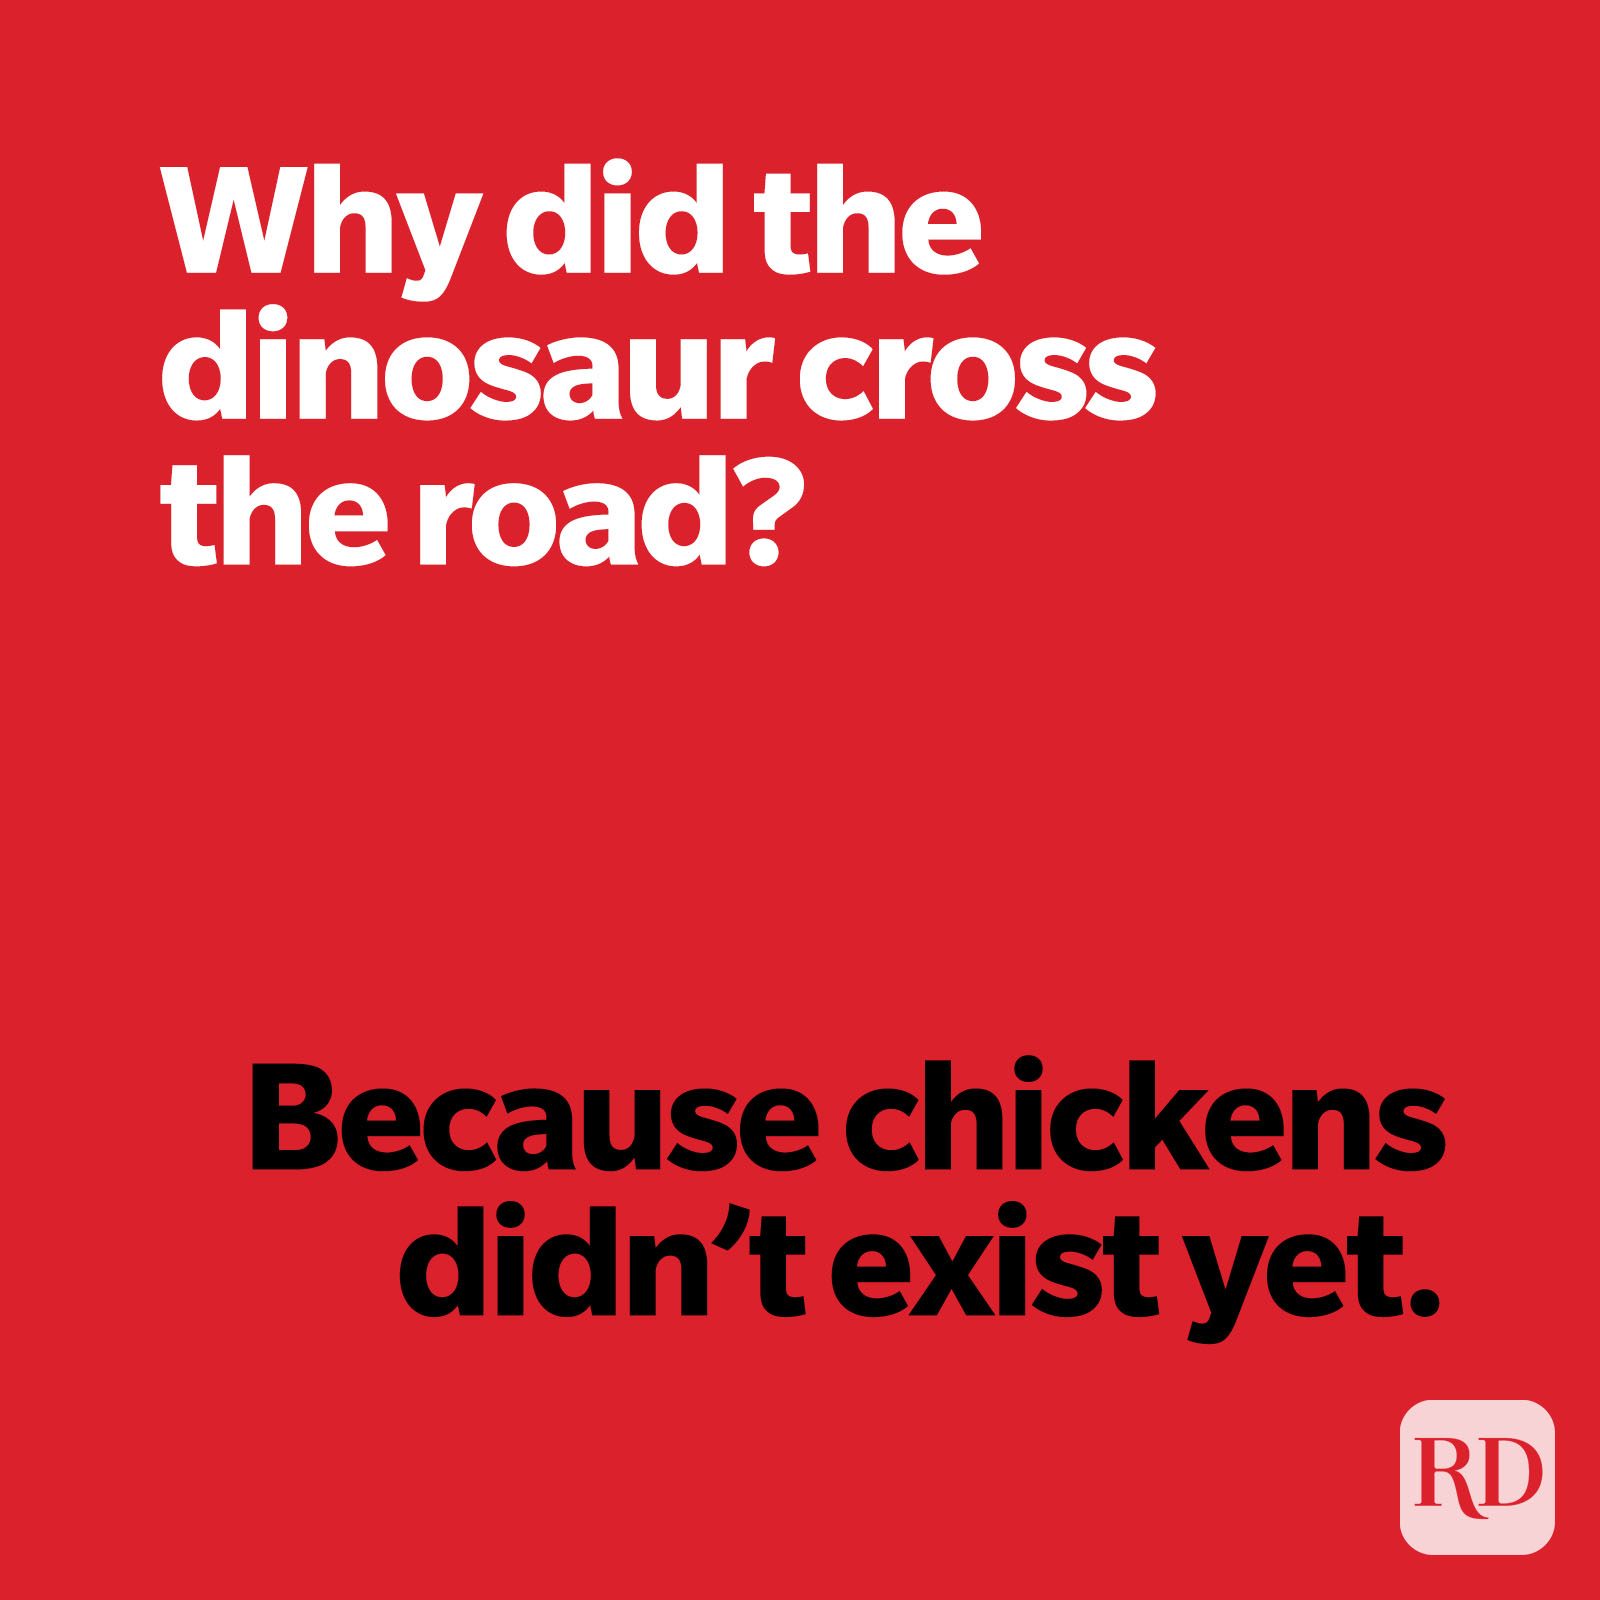 Why did the dinosaur cross the road? Because chickens didn